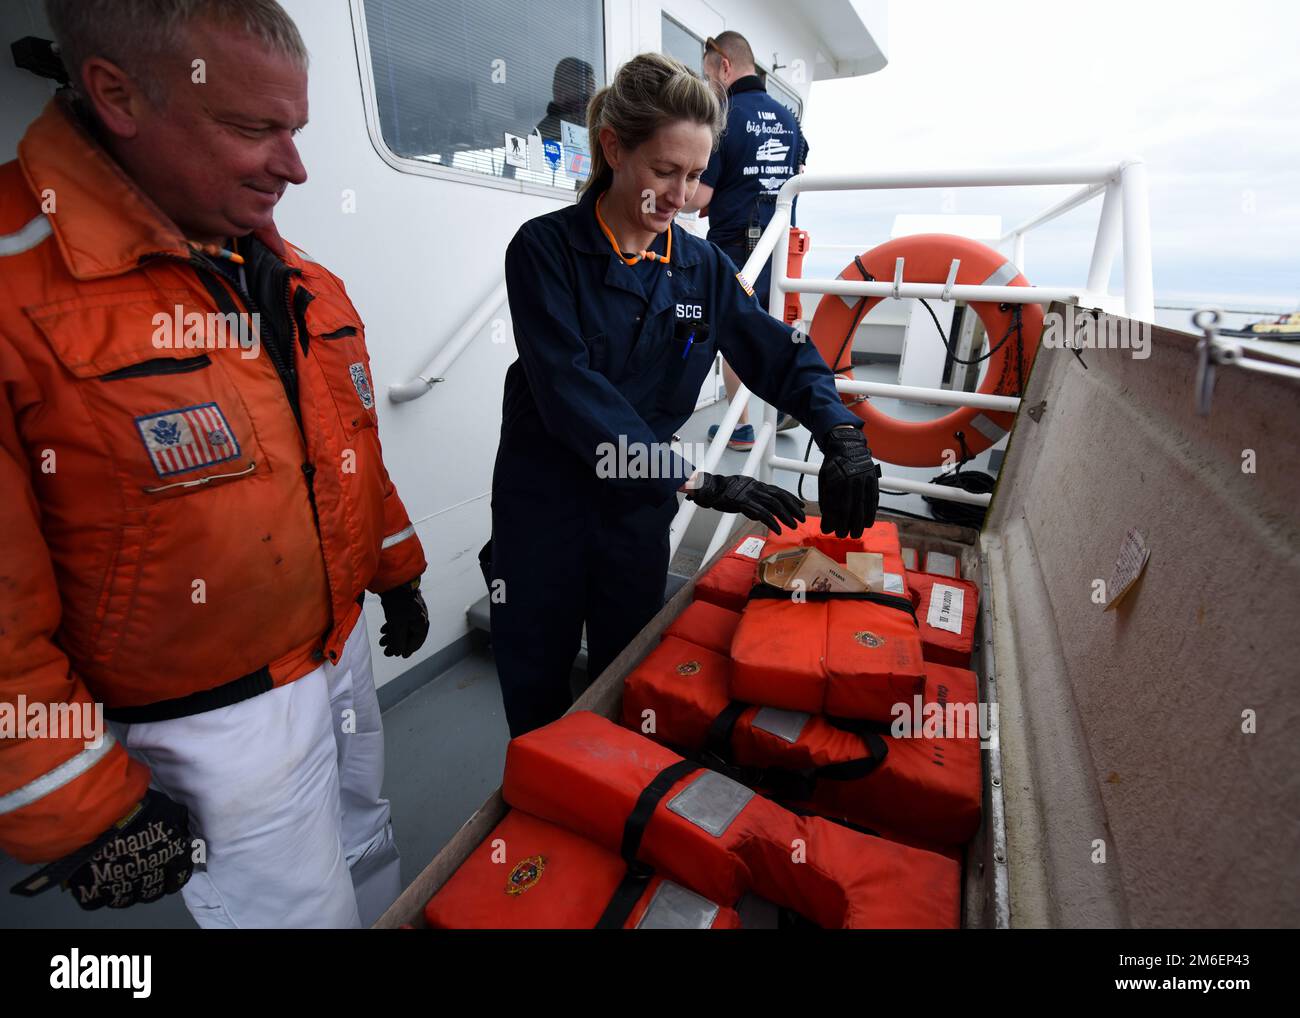 U.S. Coast Guard Chief Warrant Officer and Lt. j.g. Amanda Degener, marine inspectors at Marine Safety Unit (MSU) Cleveland, inspects life jackets during a vessel inspection April 26, 2022, in Cleveland, Ohio. MSU Cleveland conducts vessel inspections to make sure vessels are in compliance safety, security, and environmental regulations. Stock Photo